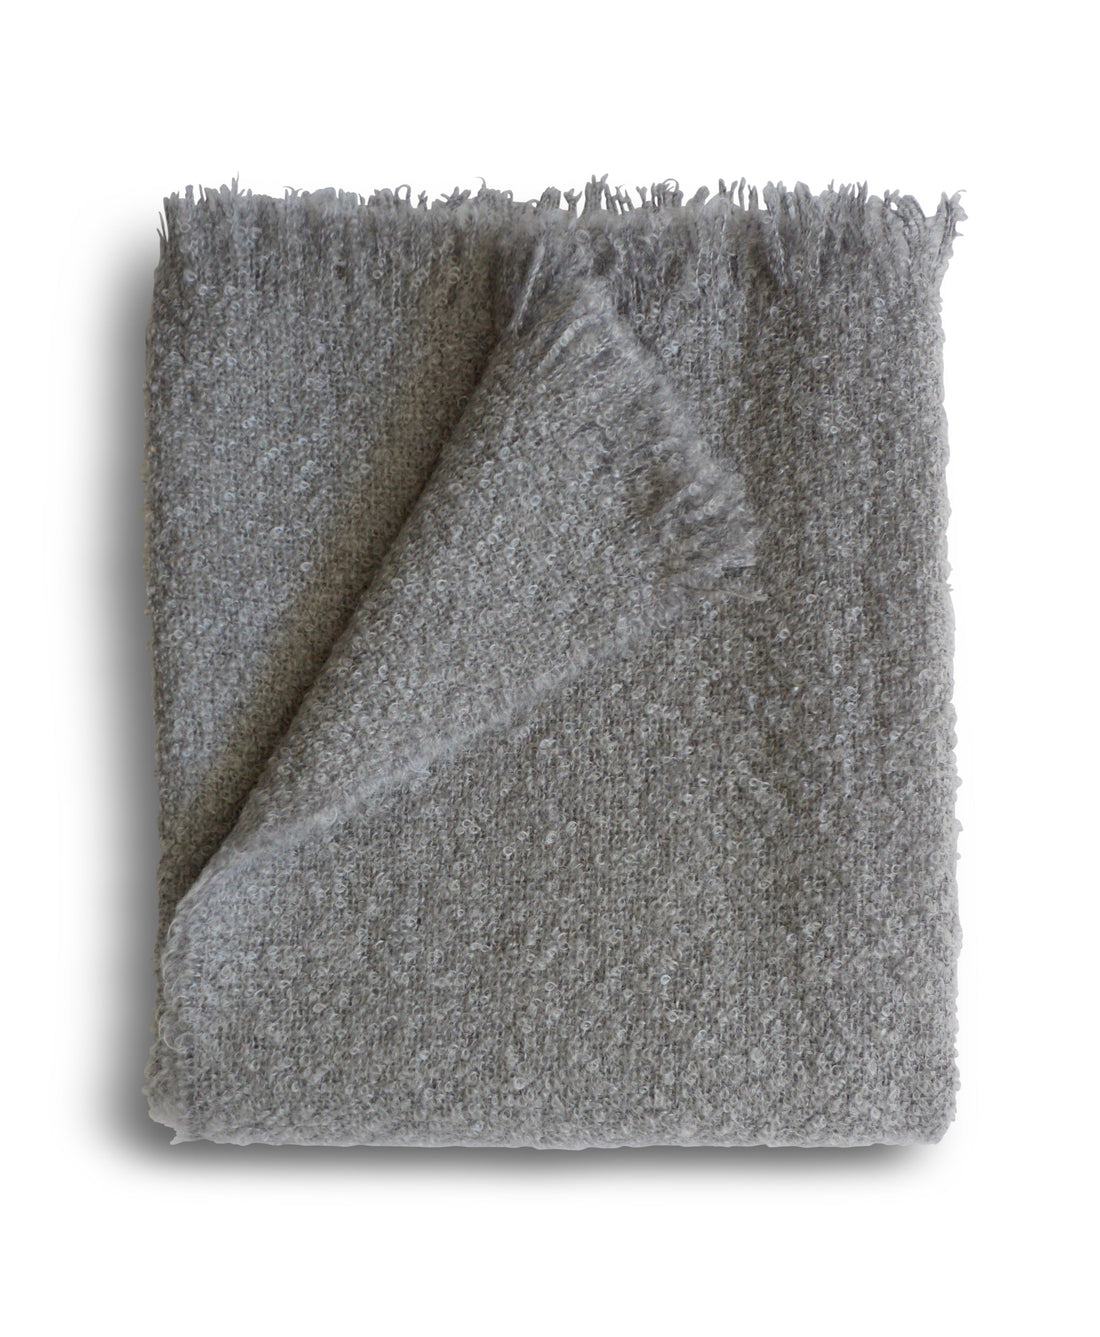 Mohair Wool Throw Blanket - 55% Mohair 34% Wool, Ultra Soft and